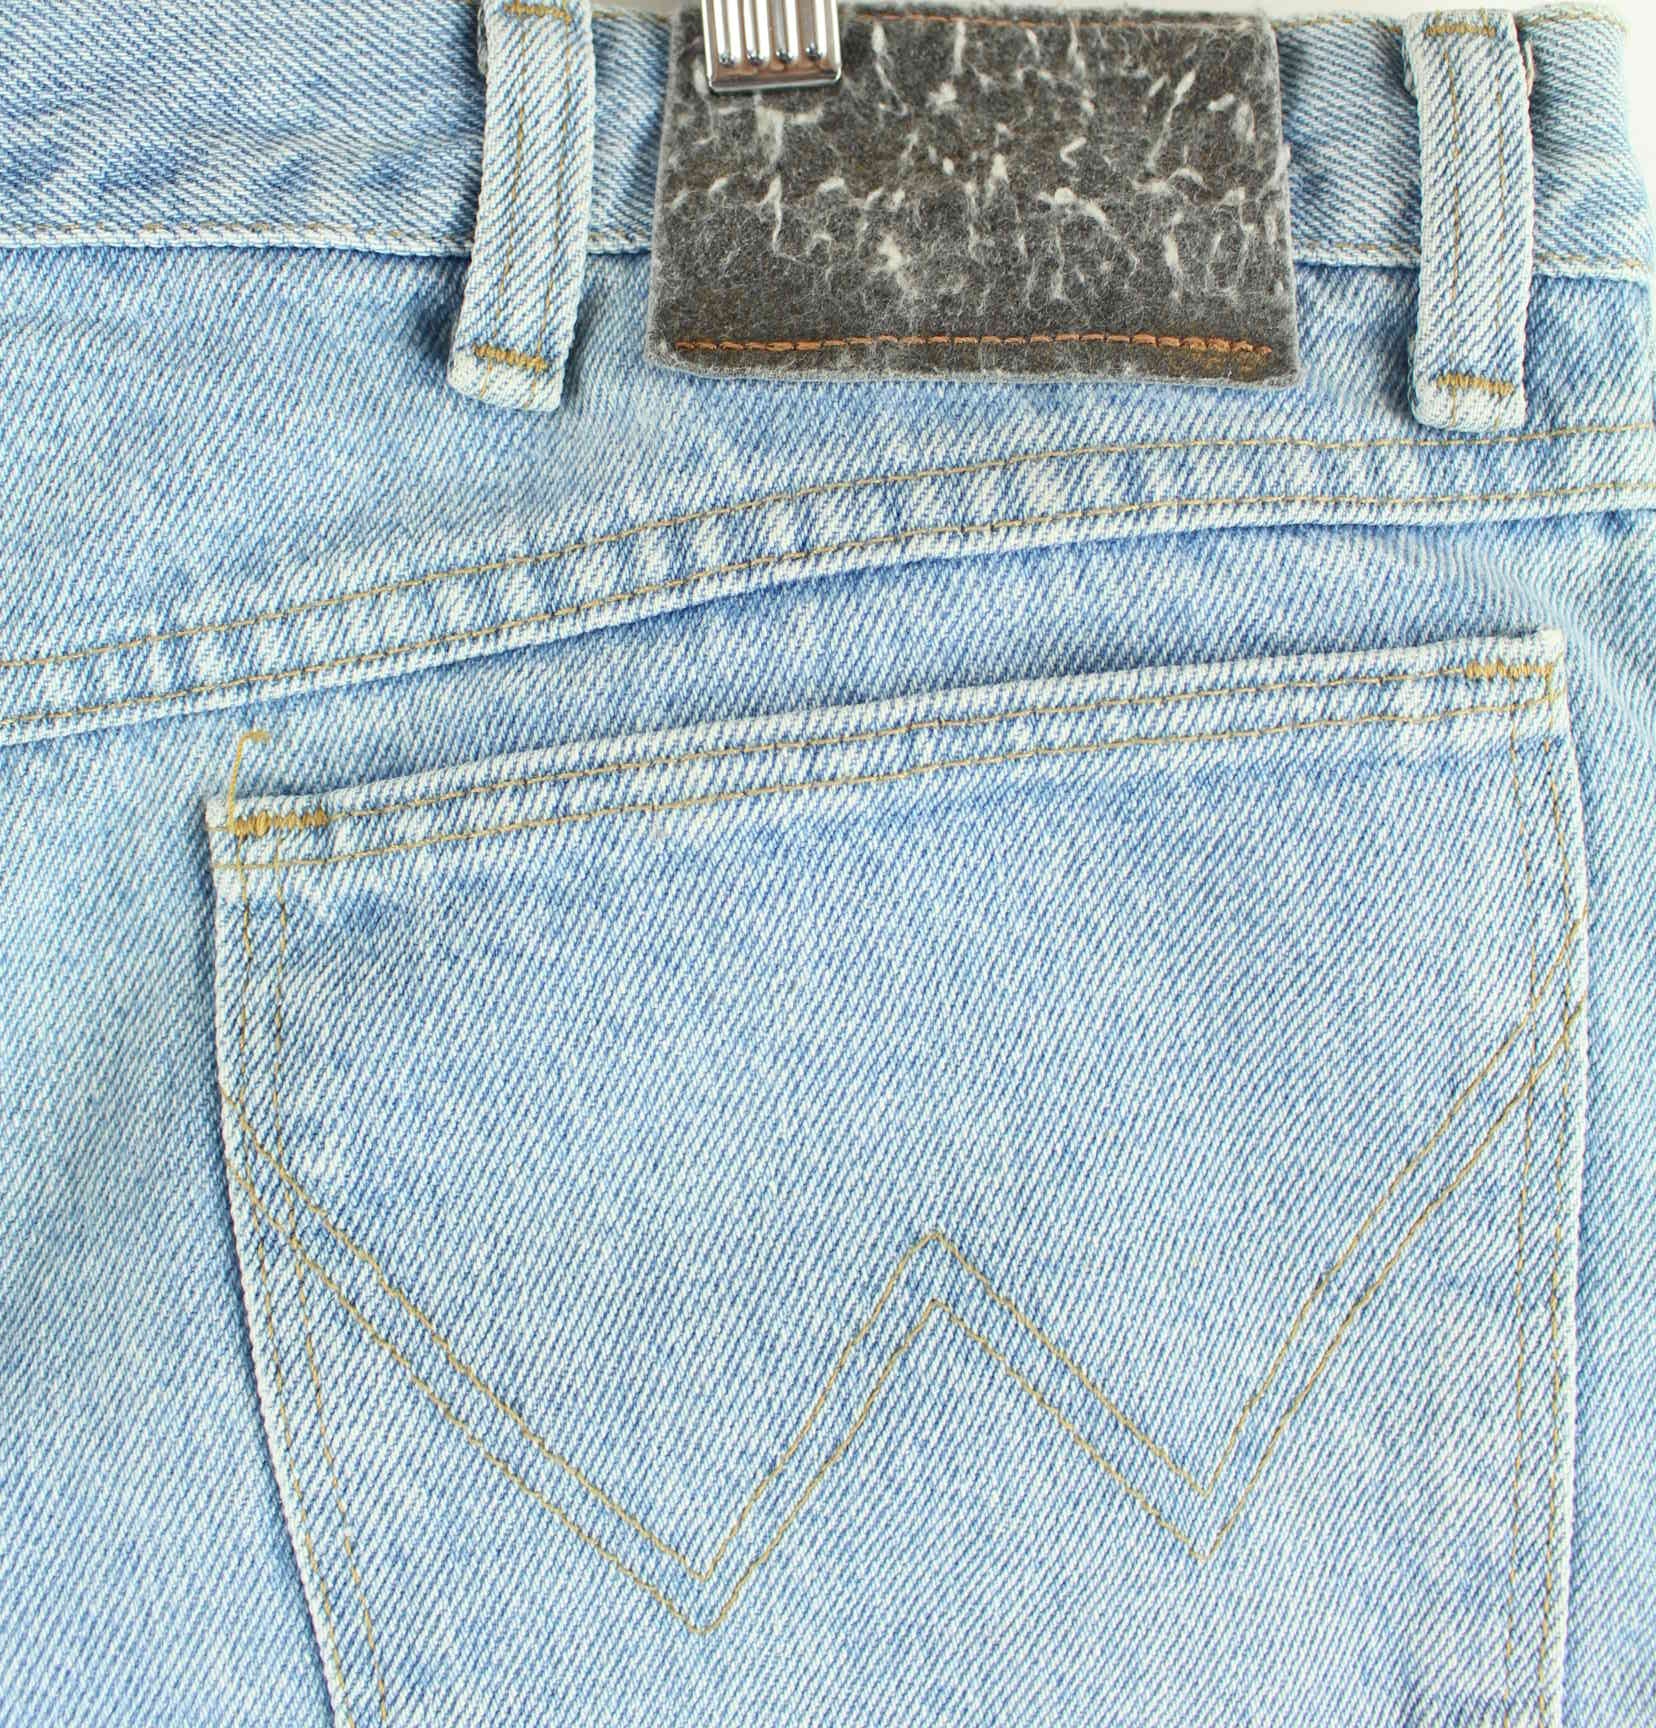 Wrangler Relaxed Fit Jeans Blau W44 L32 (detail image 4)